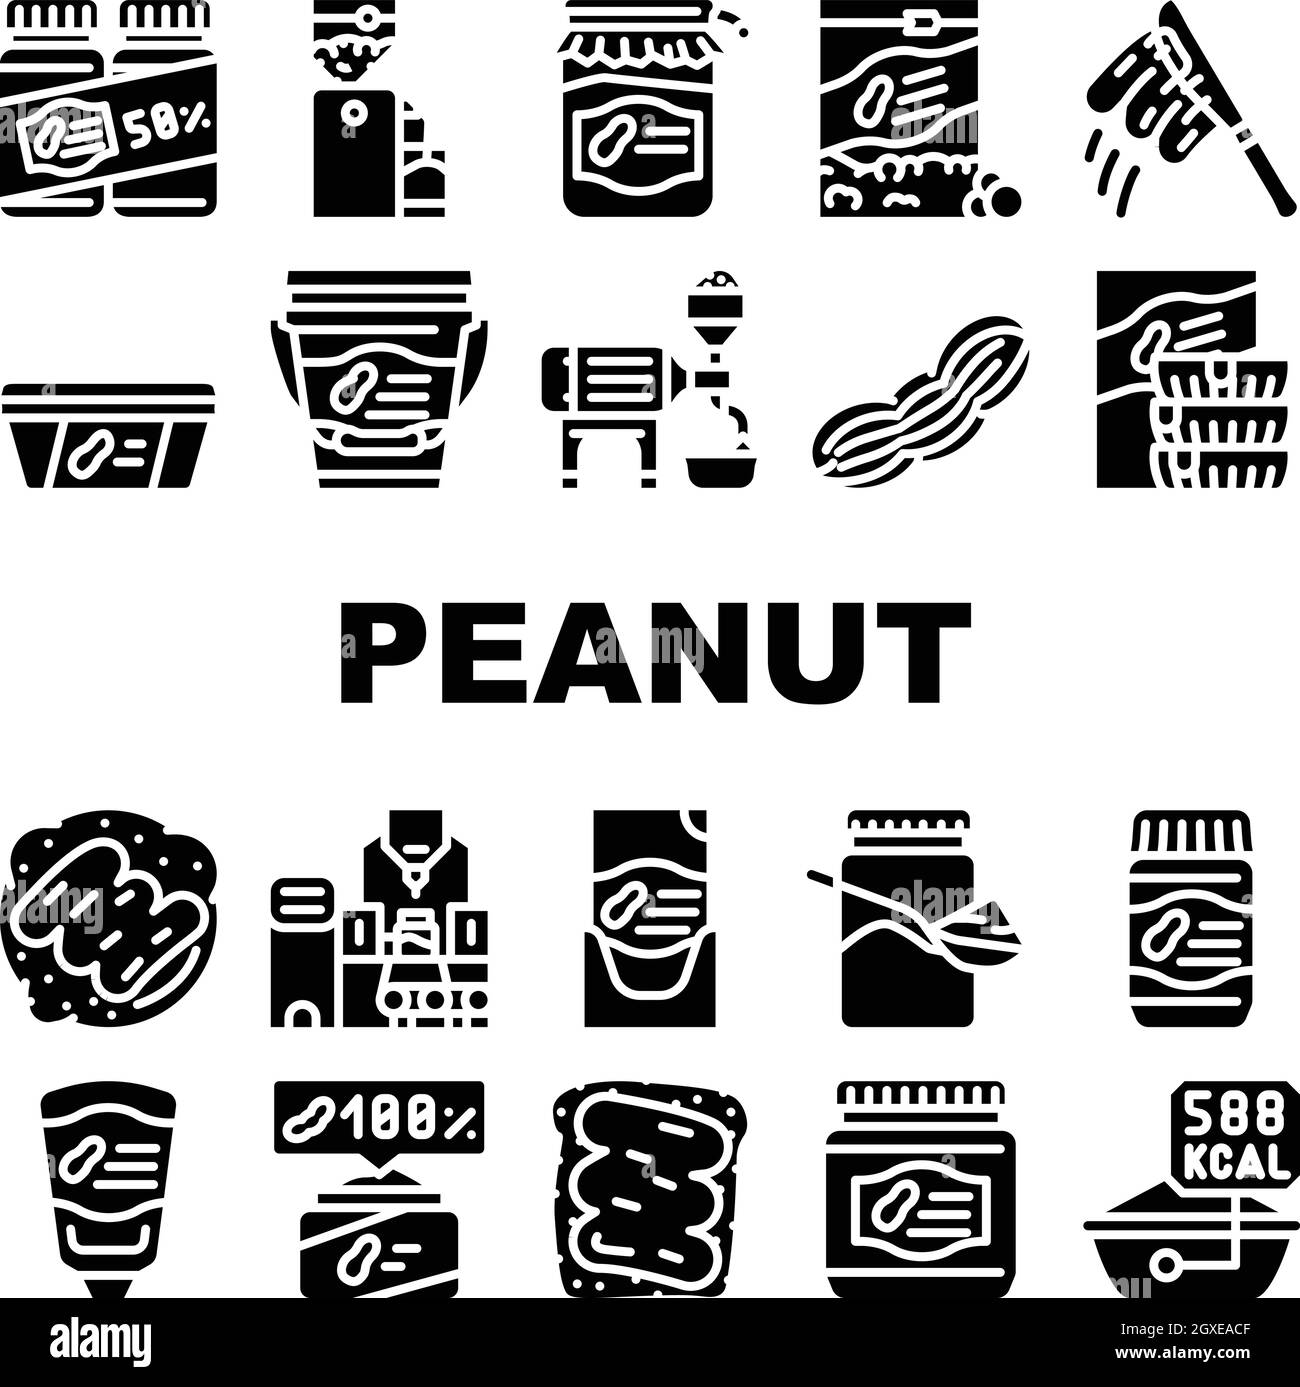 Peanut Butter Food Collection Icons Set Vector Stock Vector